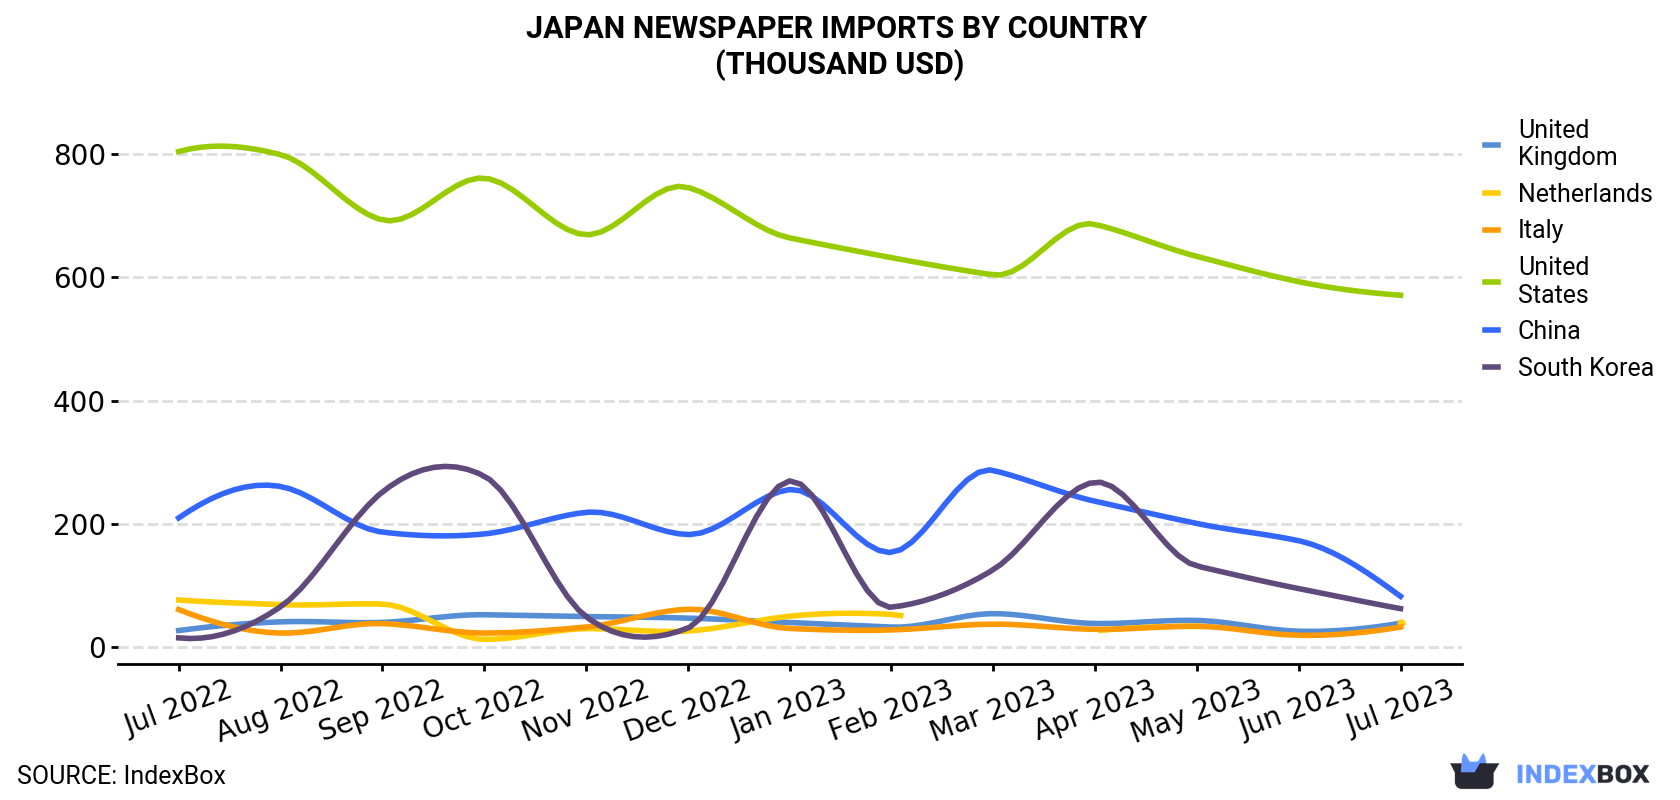 Japan Newspaper Imports By Country (Thousand USD)